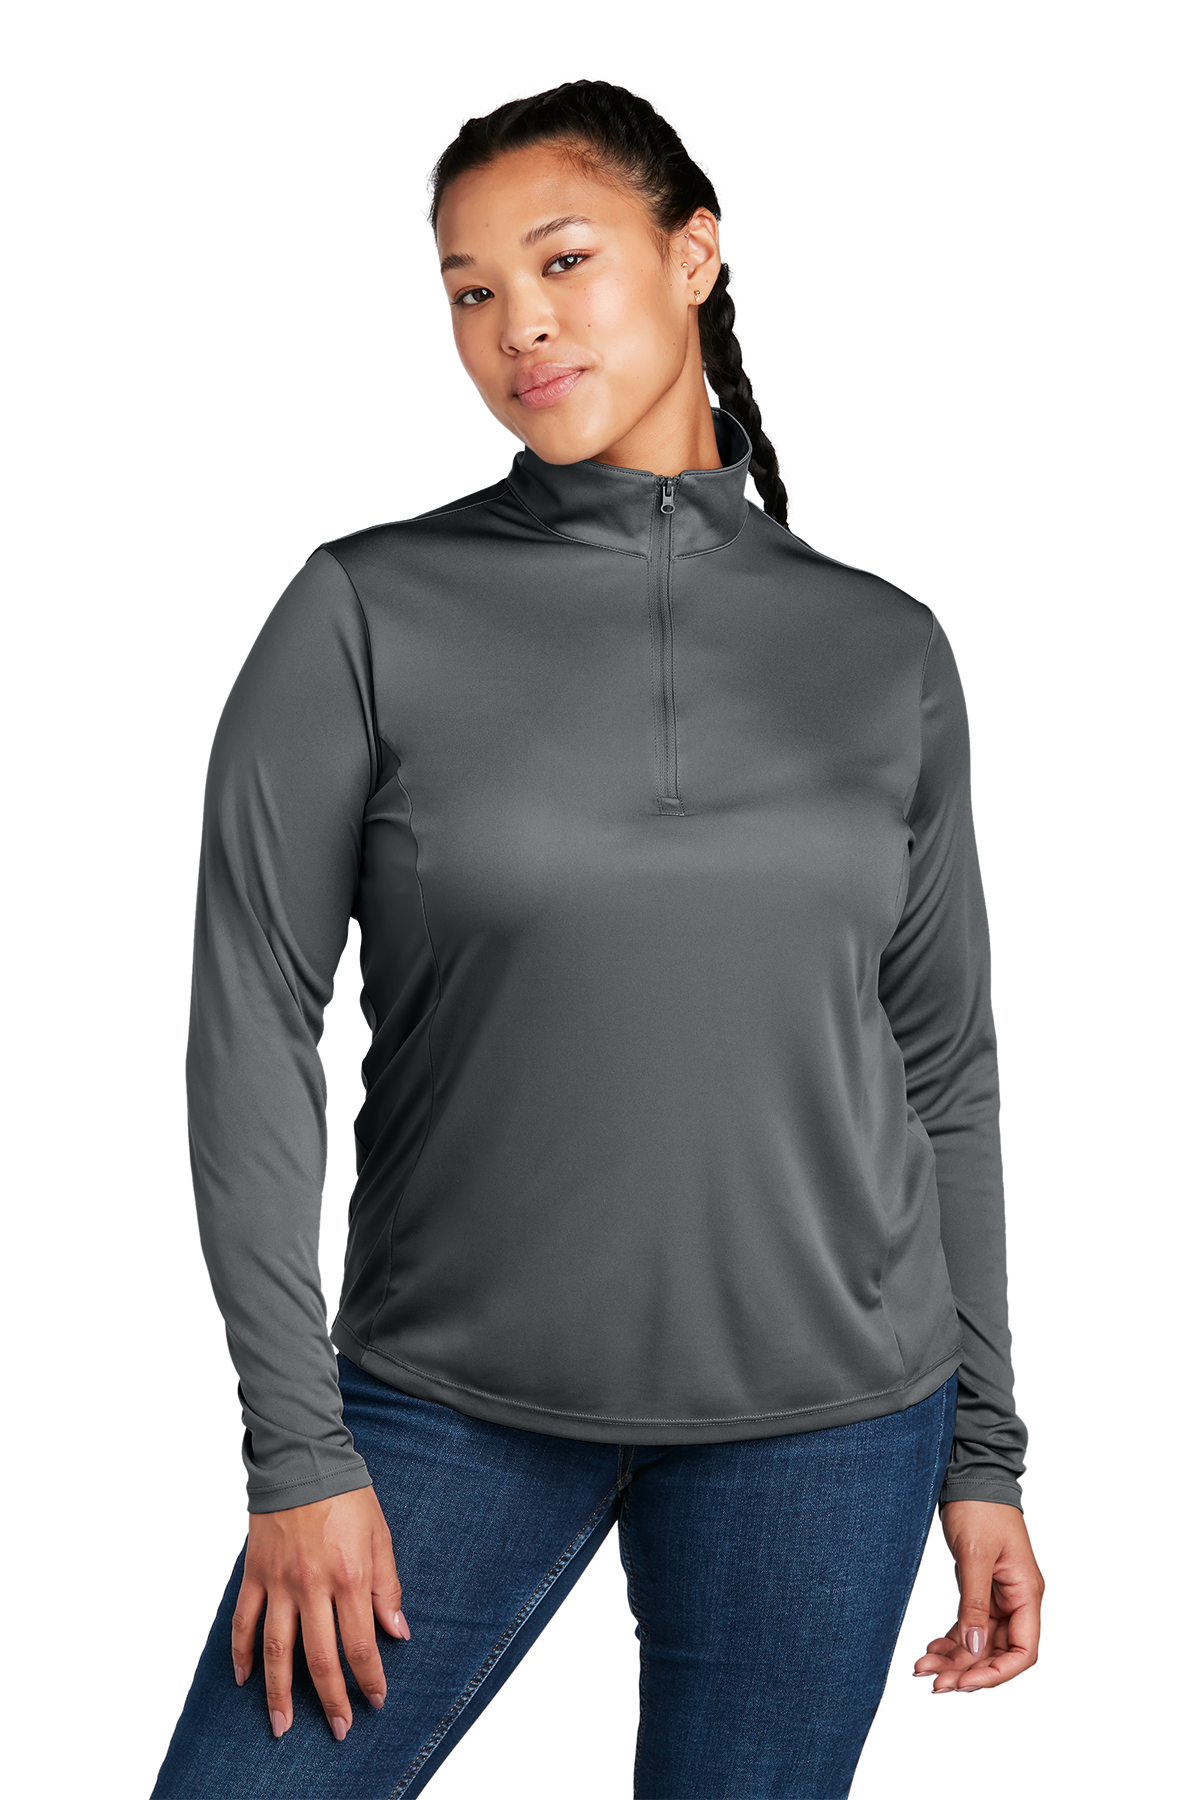 Sport-Tek Ladies PosiCharge Competitor™ 1/4-Zip Pullover | Product ...